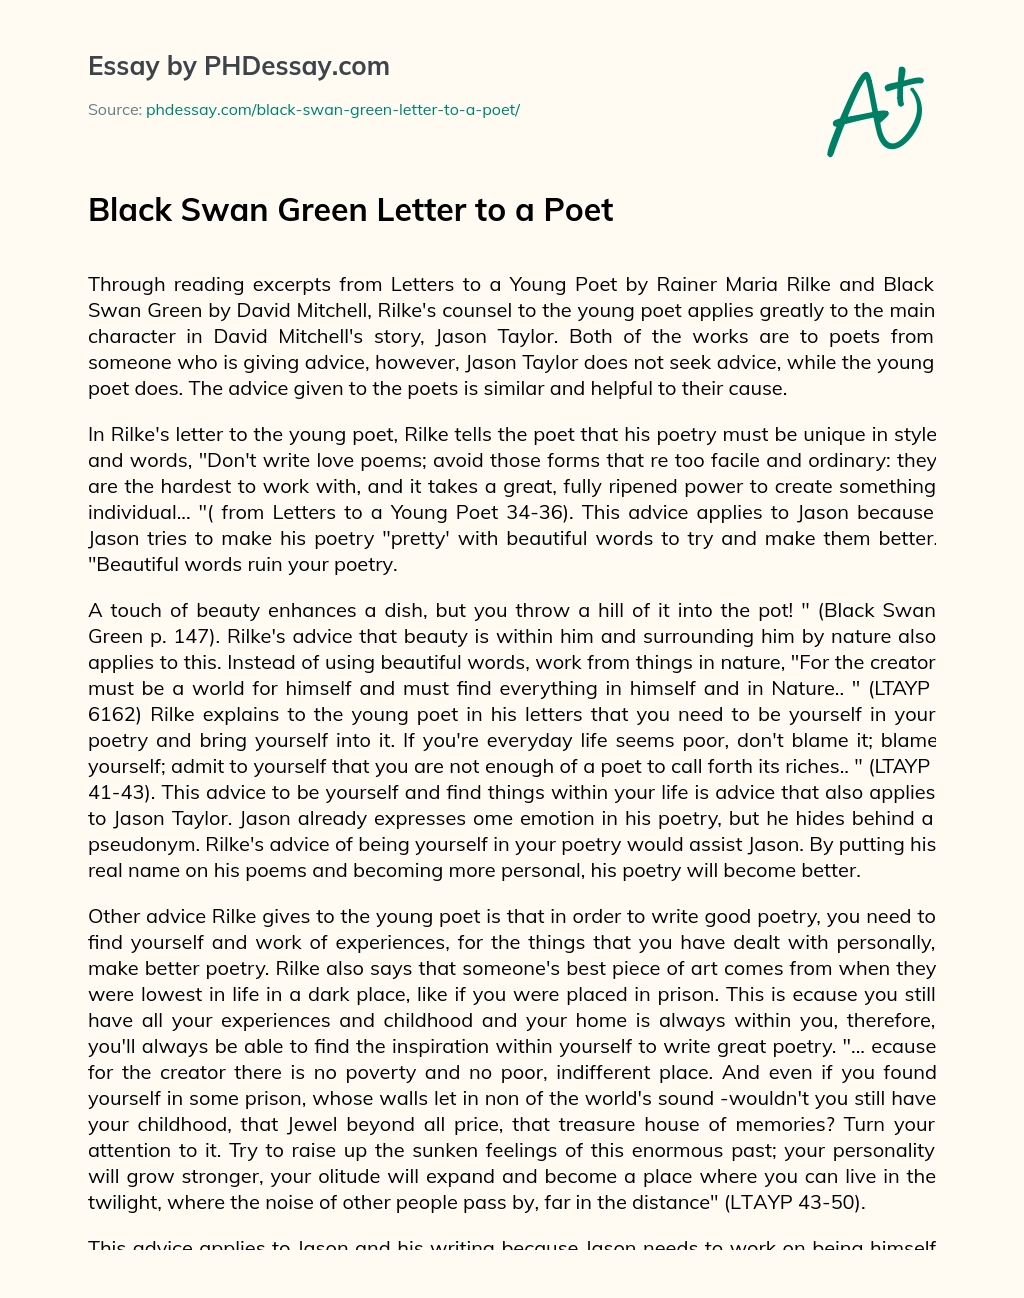 Black Swan Green Letter to a Poet essay